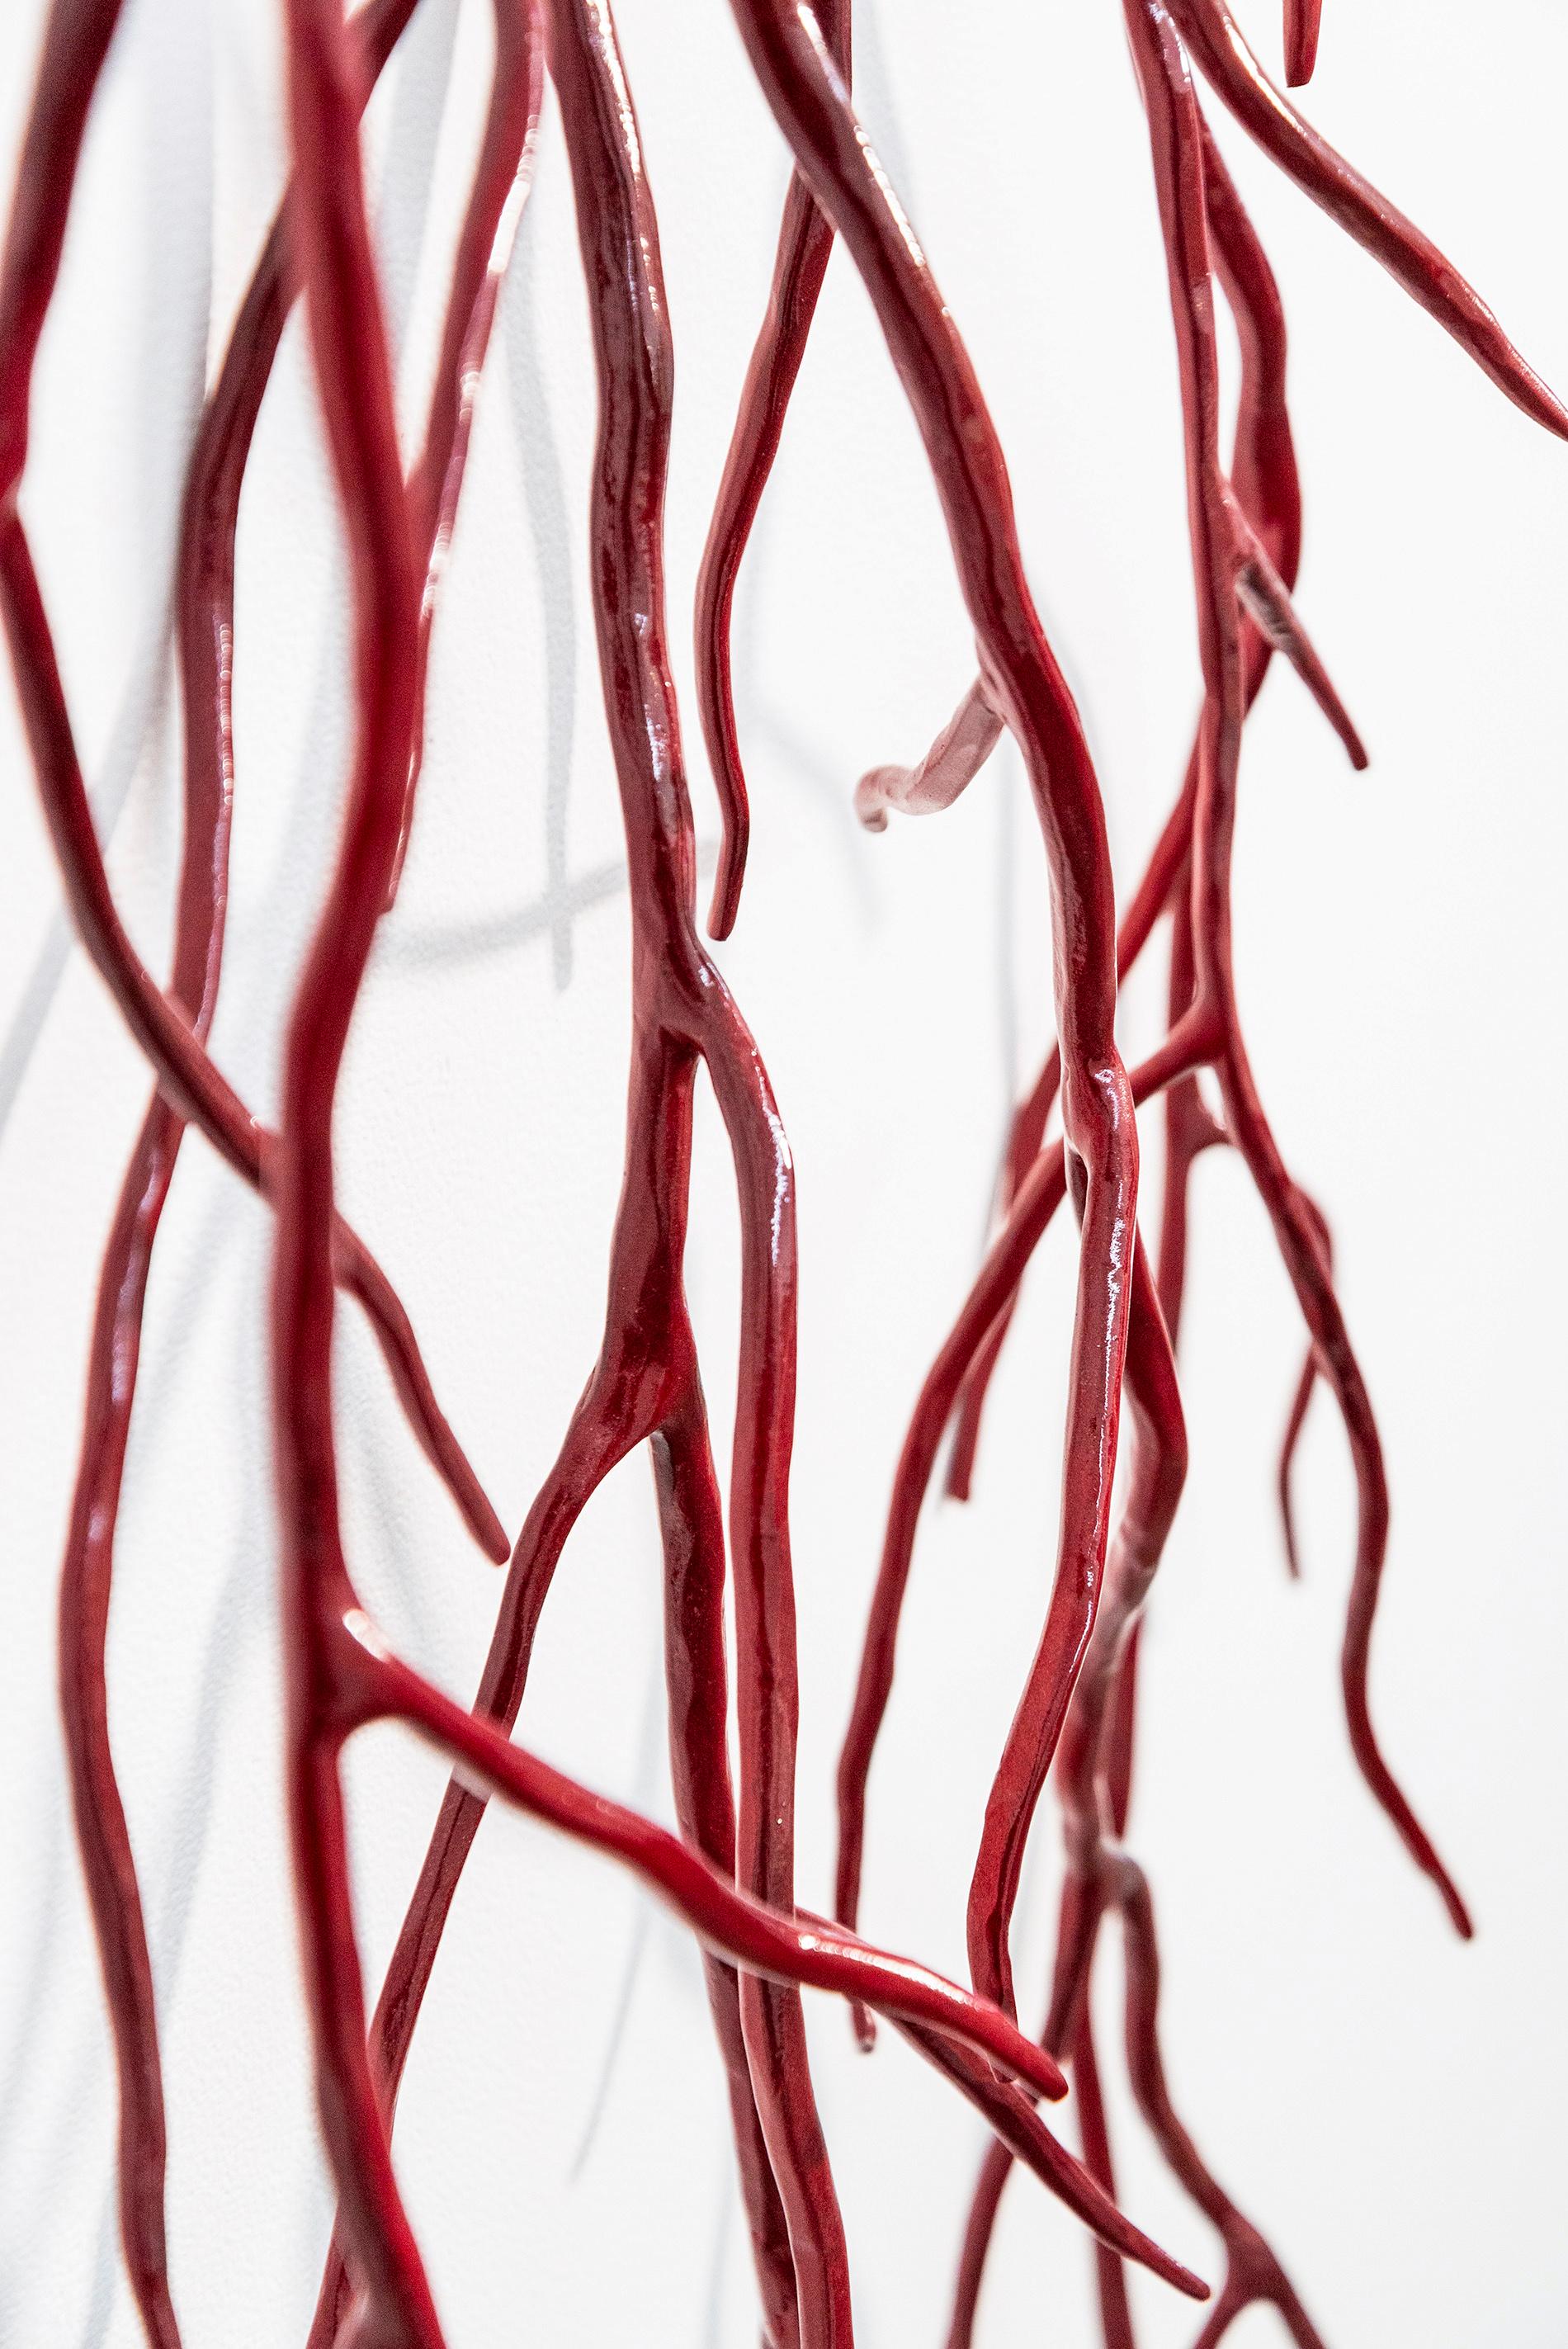 Red Bough - bright, contemporary, powder coated steel, wall sculpture For Sale 6